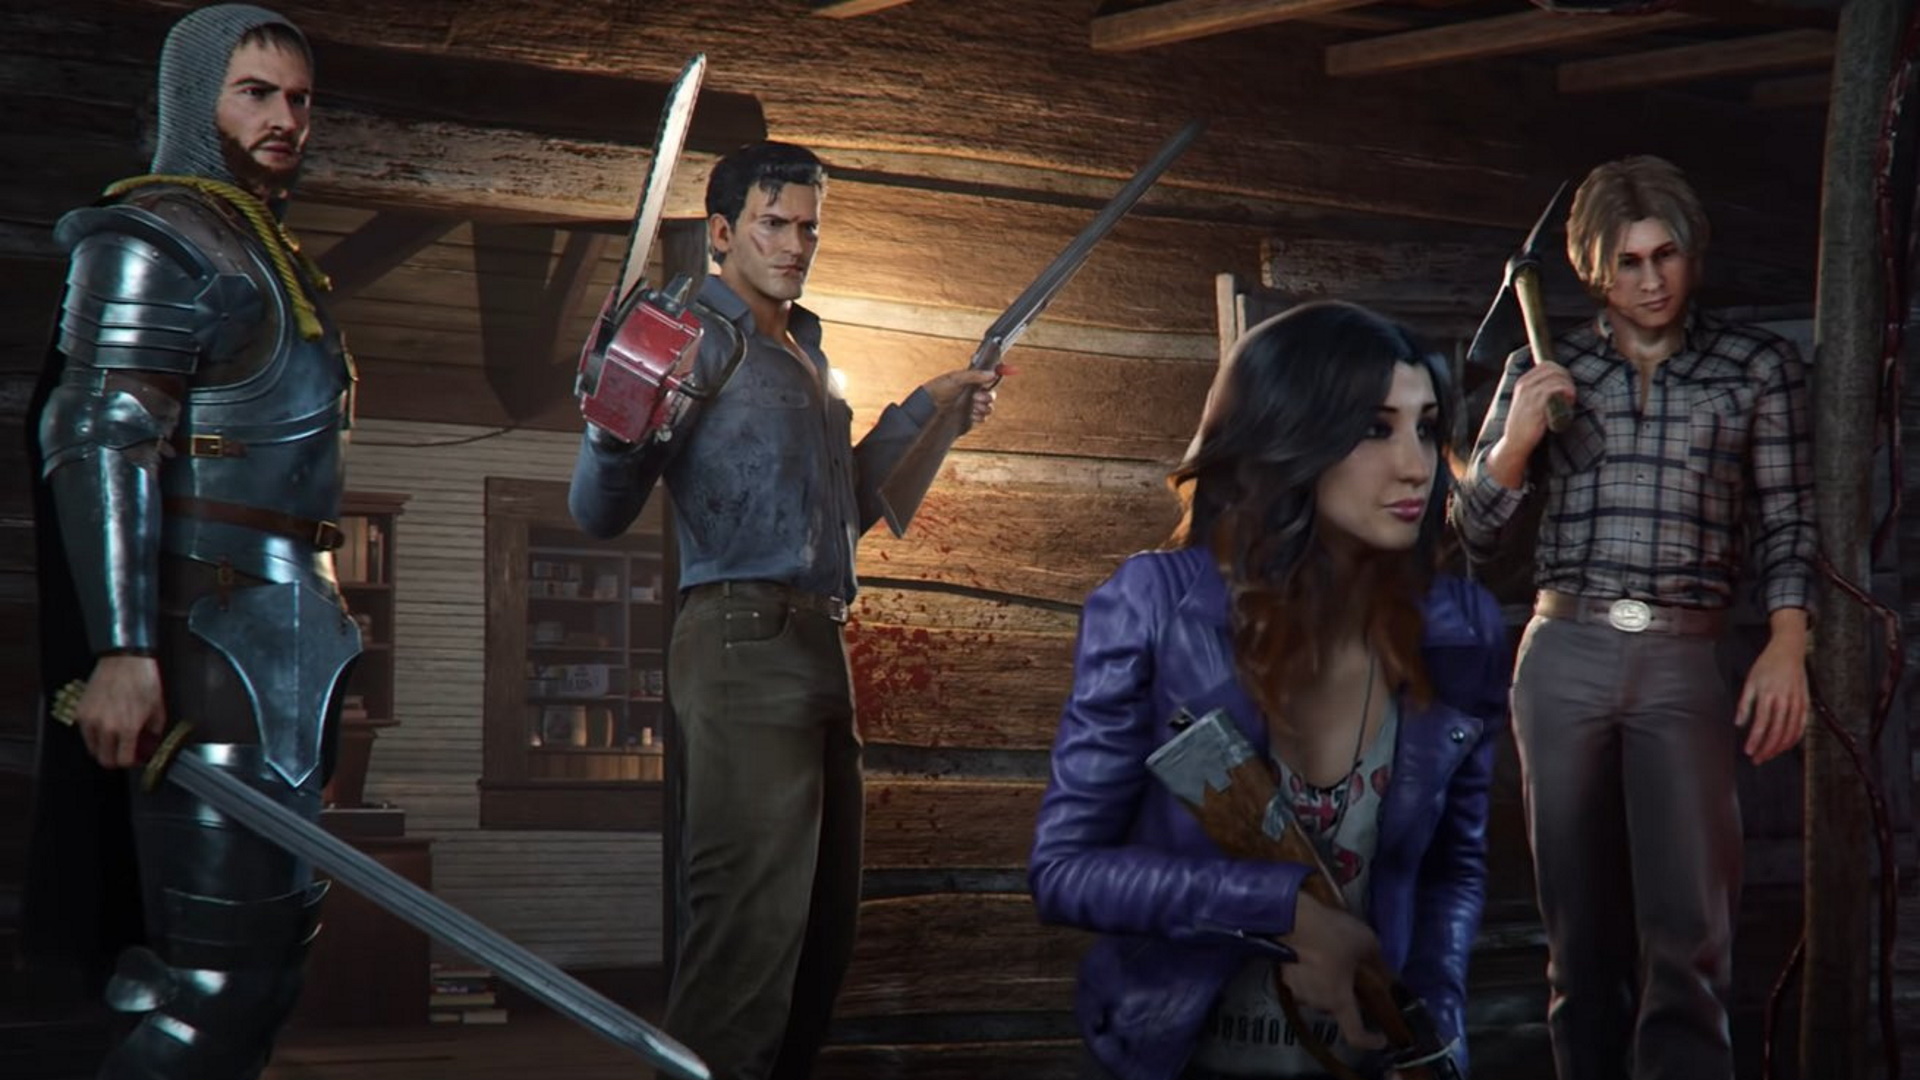 Evil Dead: The Game - Ash and other characters stand on the front porch of a cabin